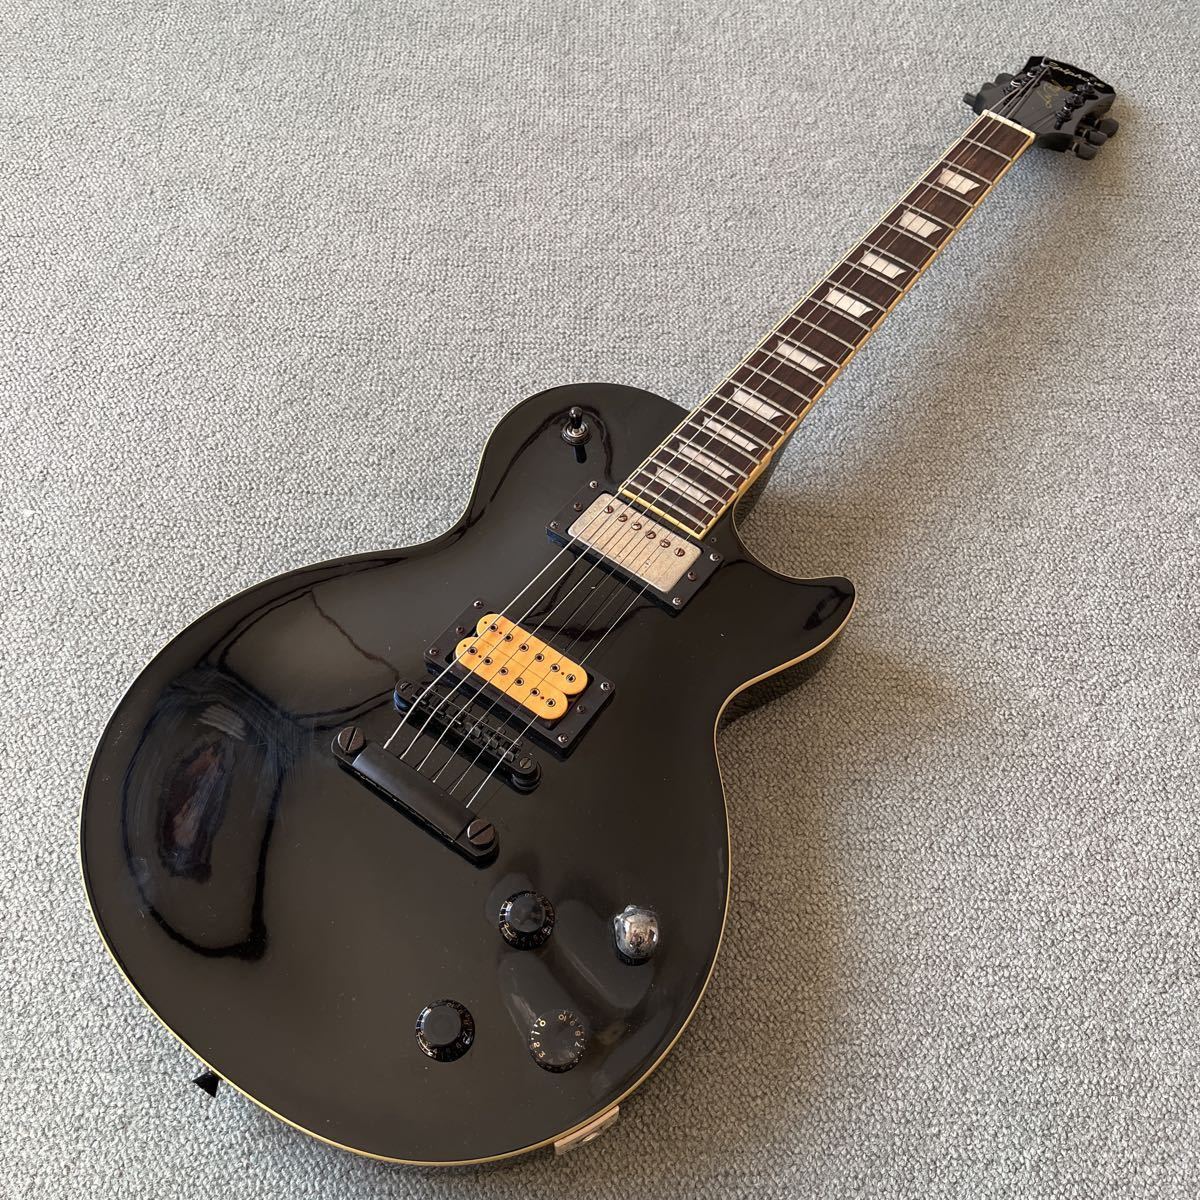 epiphone by Gibson Les Paul standard BLK 黒　エピフォン　ギブソン　レスポール　スタンダード　ジャンク　lespaul エレキギター_画像10